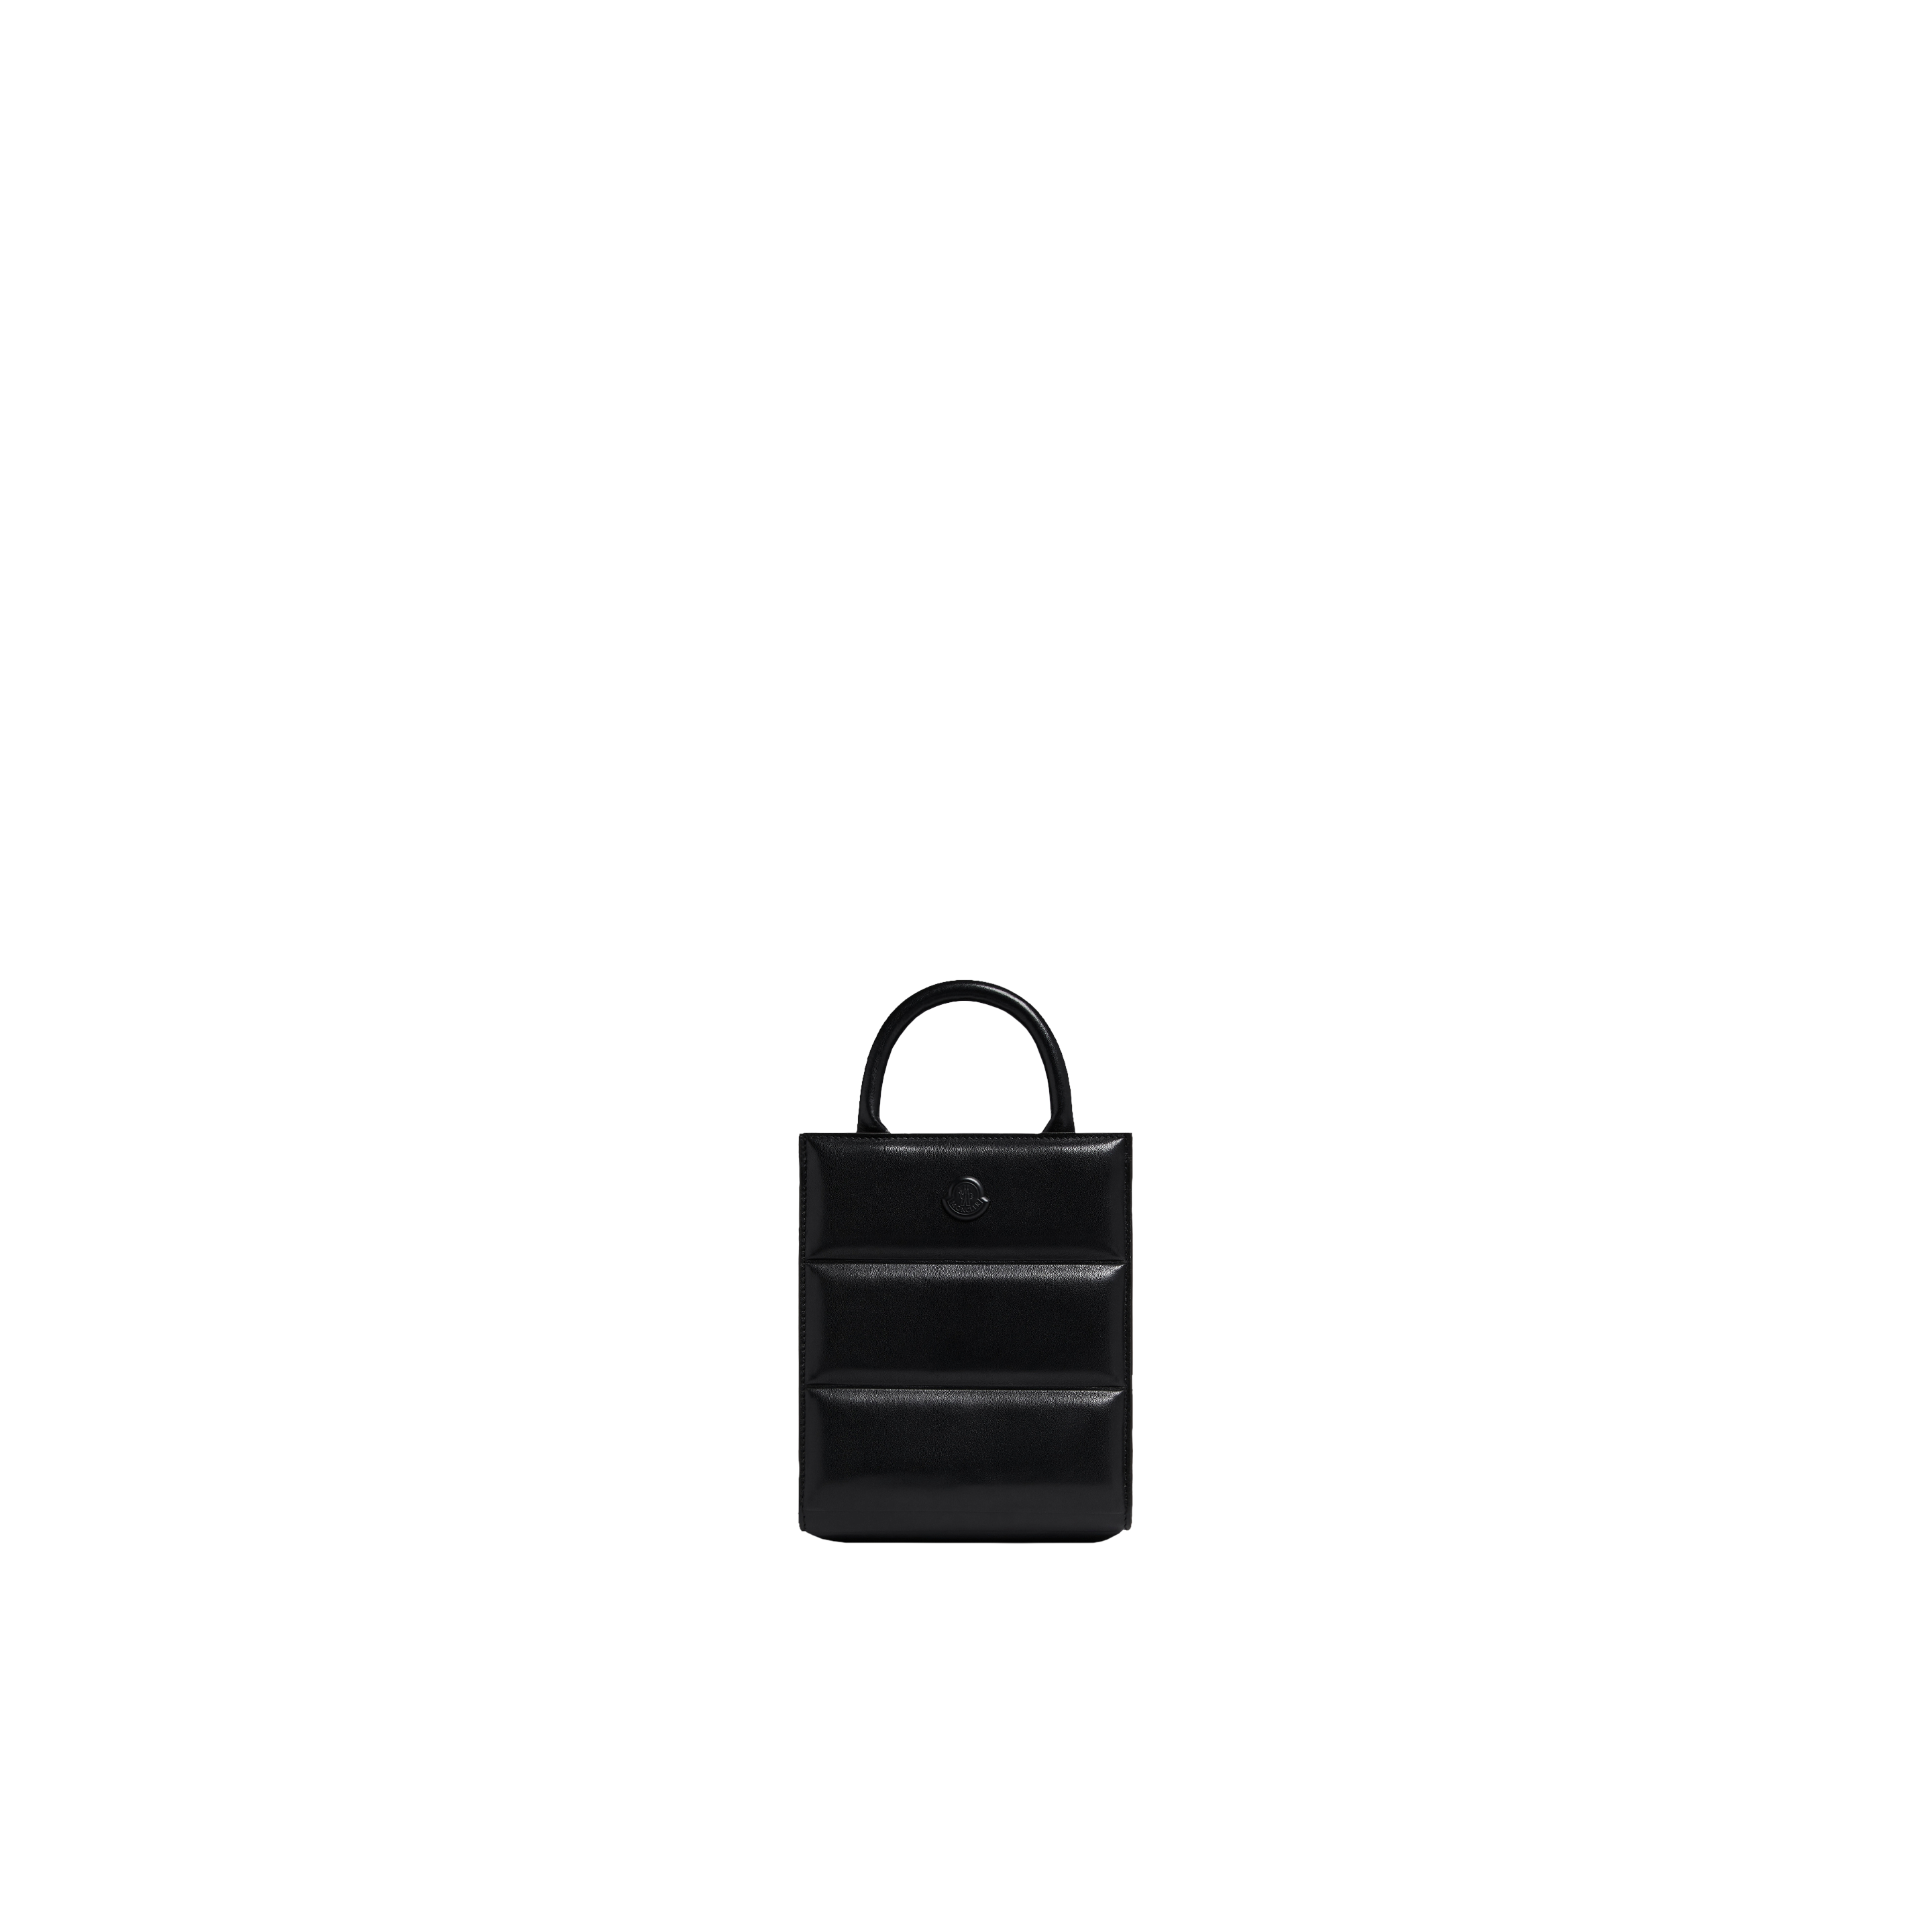 Moncler Collection Doudoune Leather Mini Tote Bag, Black, Size: One Size